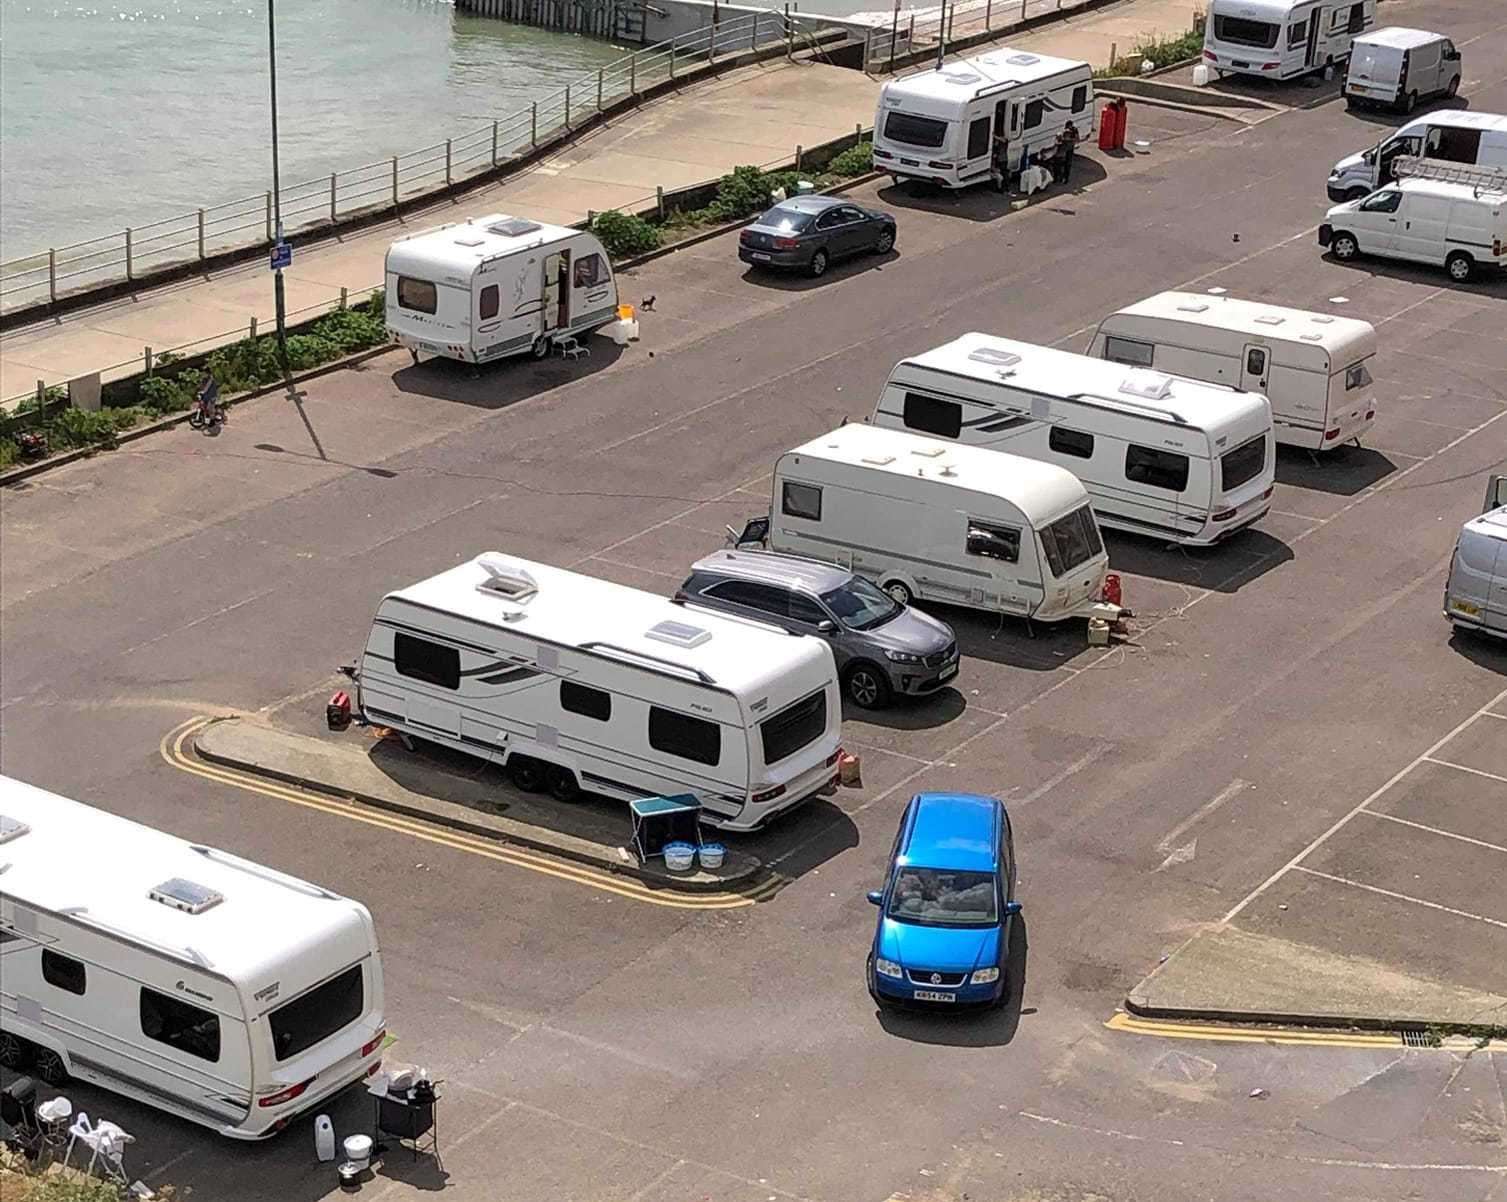 Councils across Kent are taking different approaches to traveller camps during the lockdown